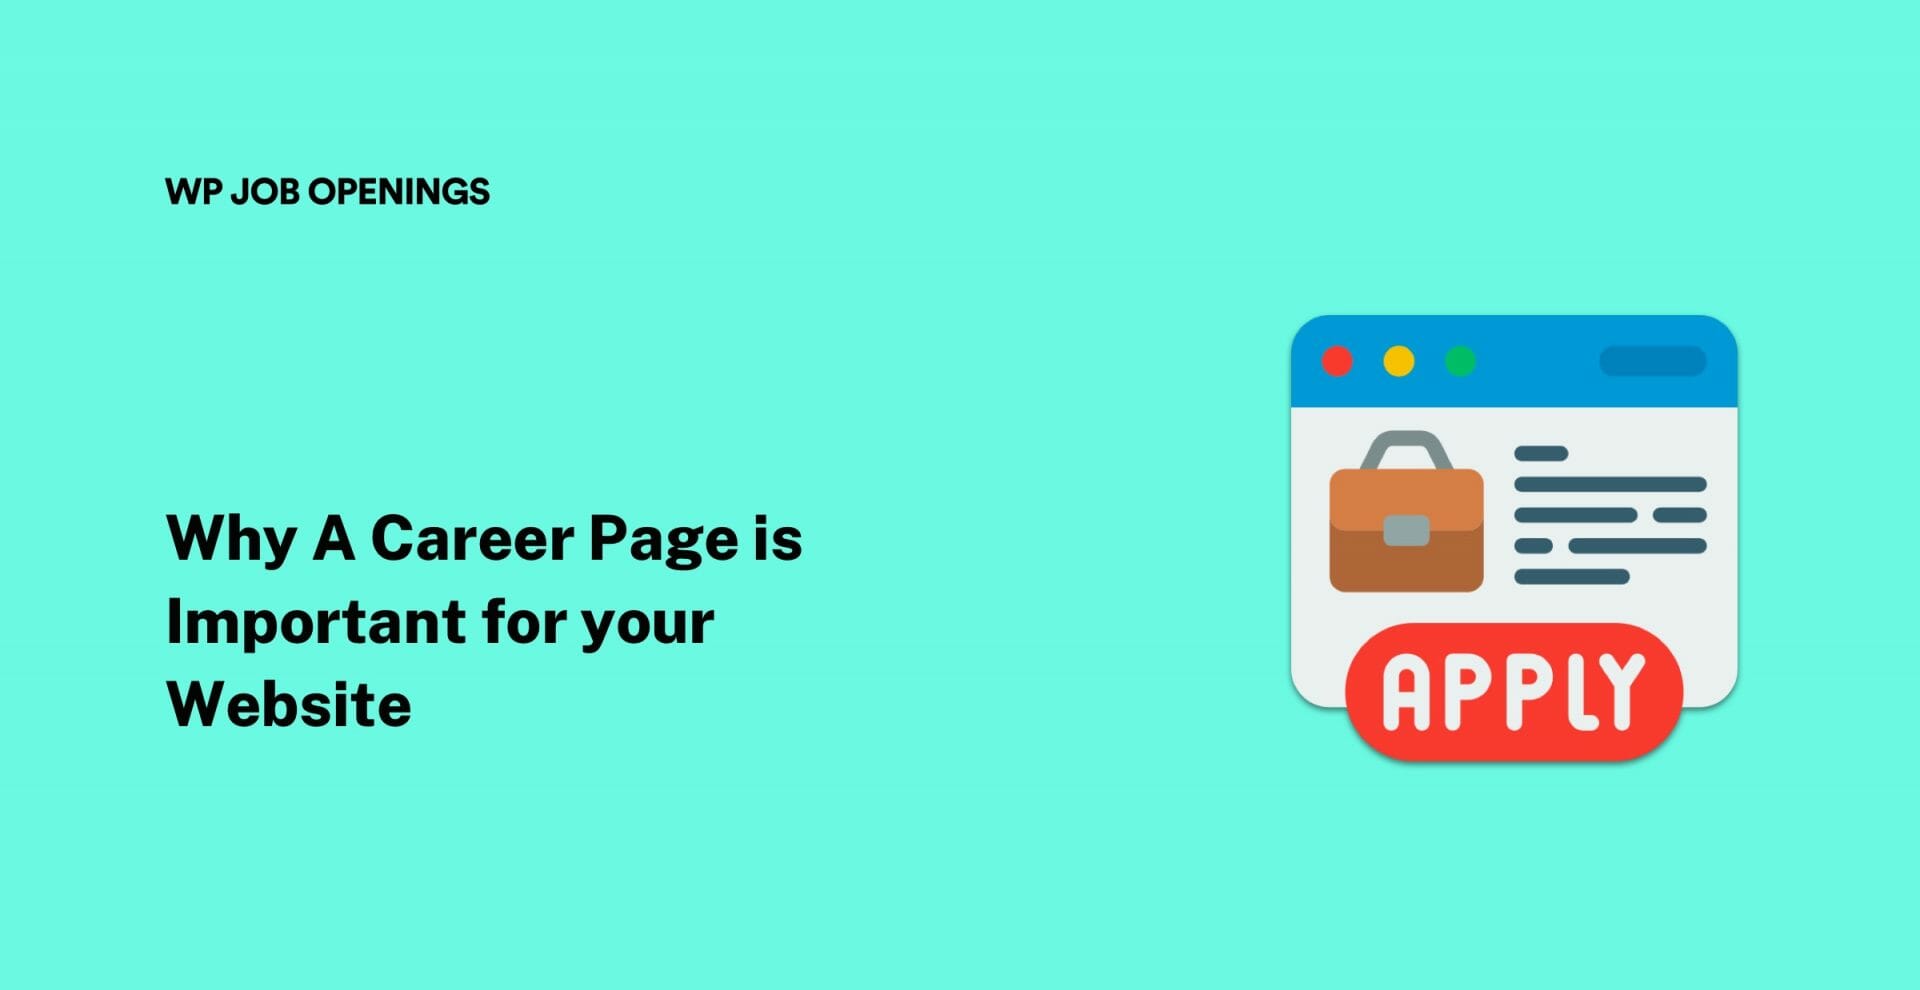 11 Reasons Why A Career Page is Important for your Website